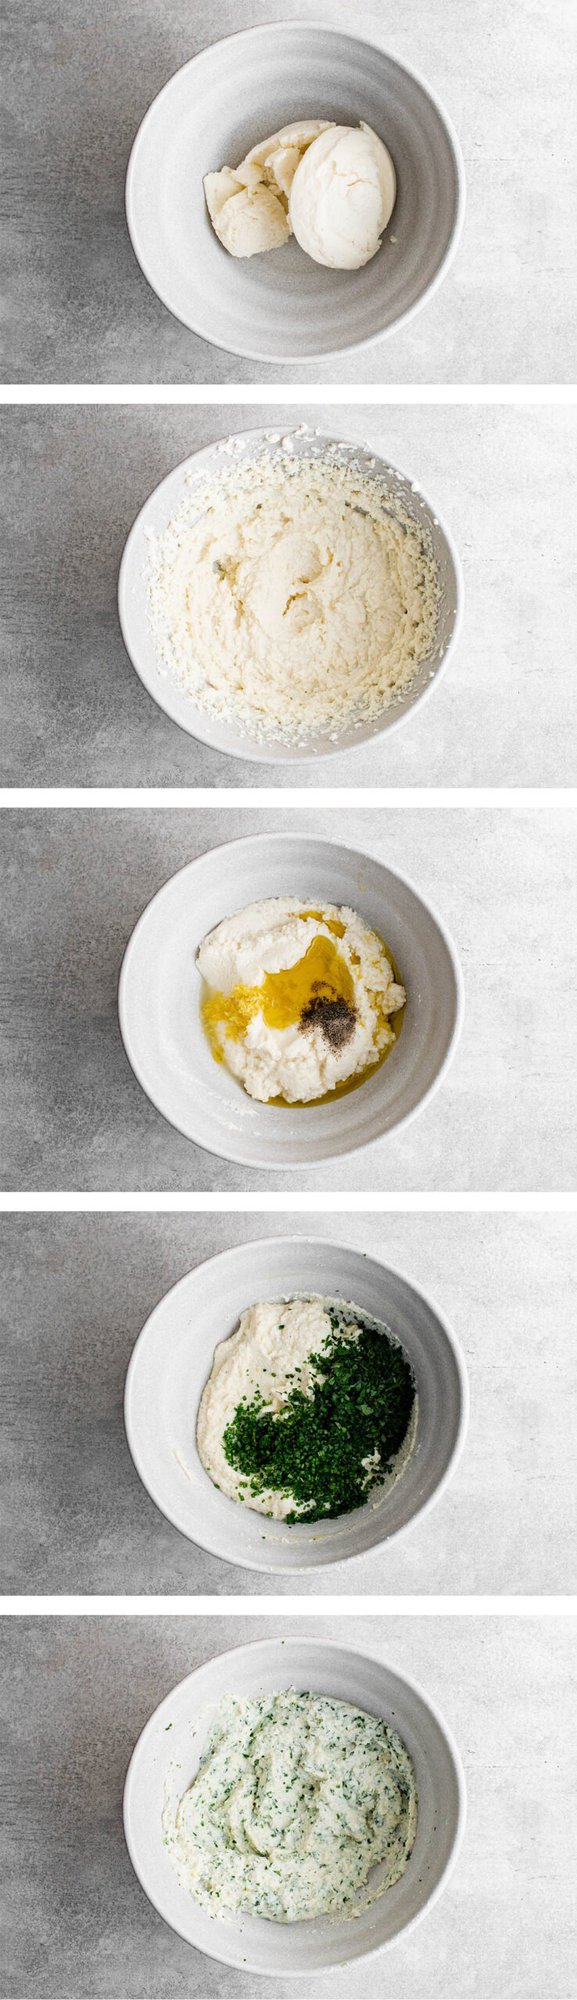 collage of images showing how to make whipped ricotta